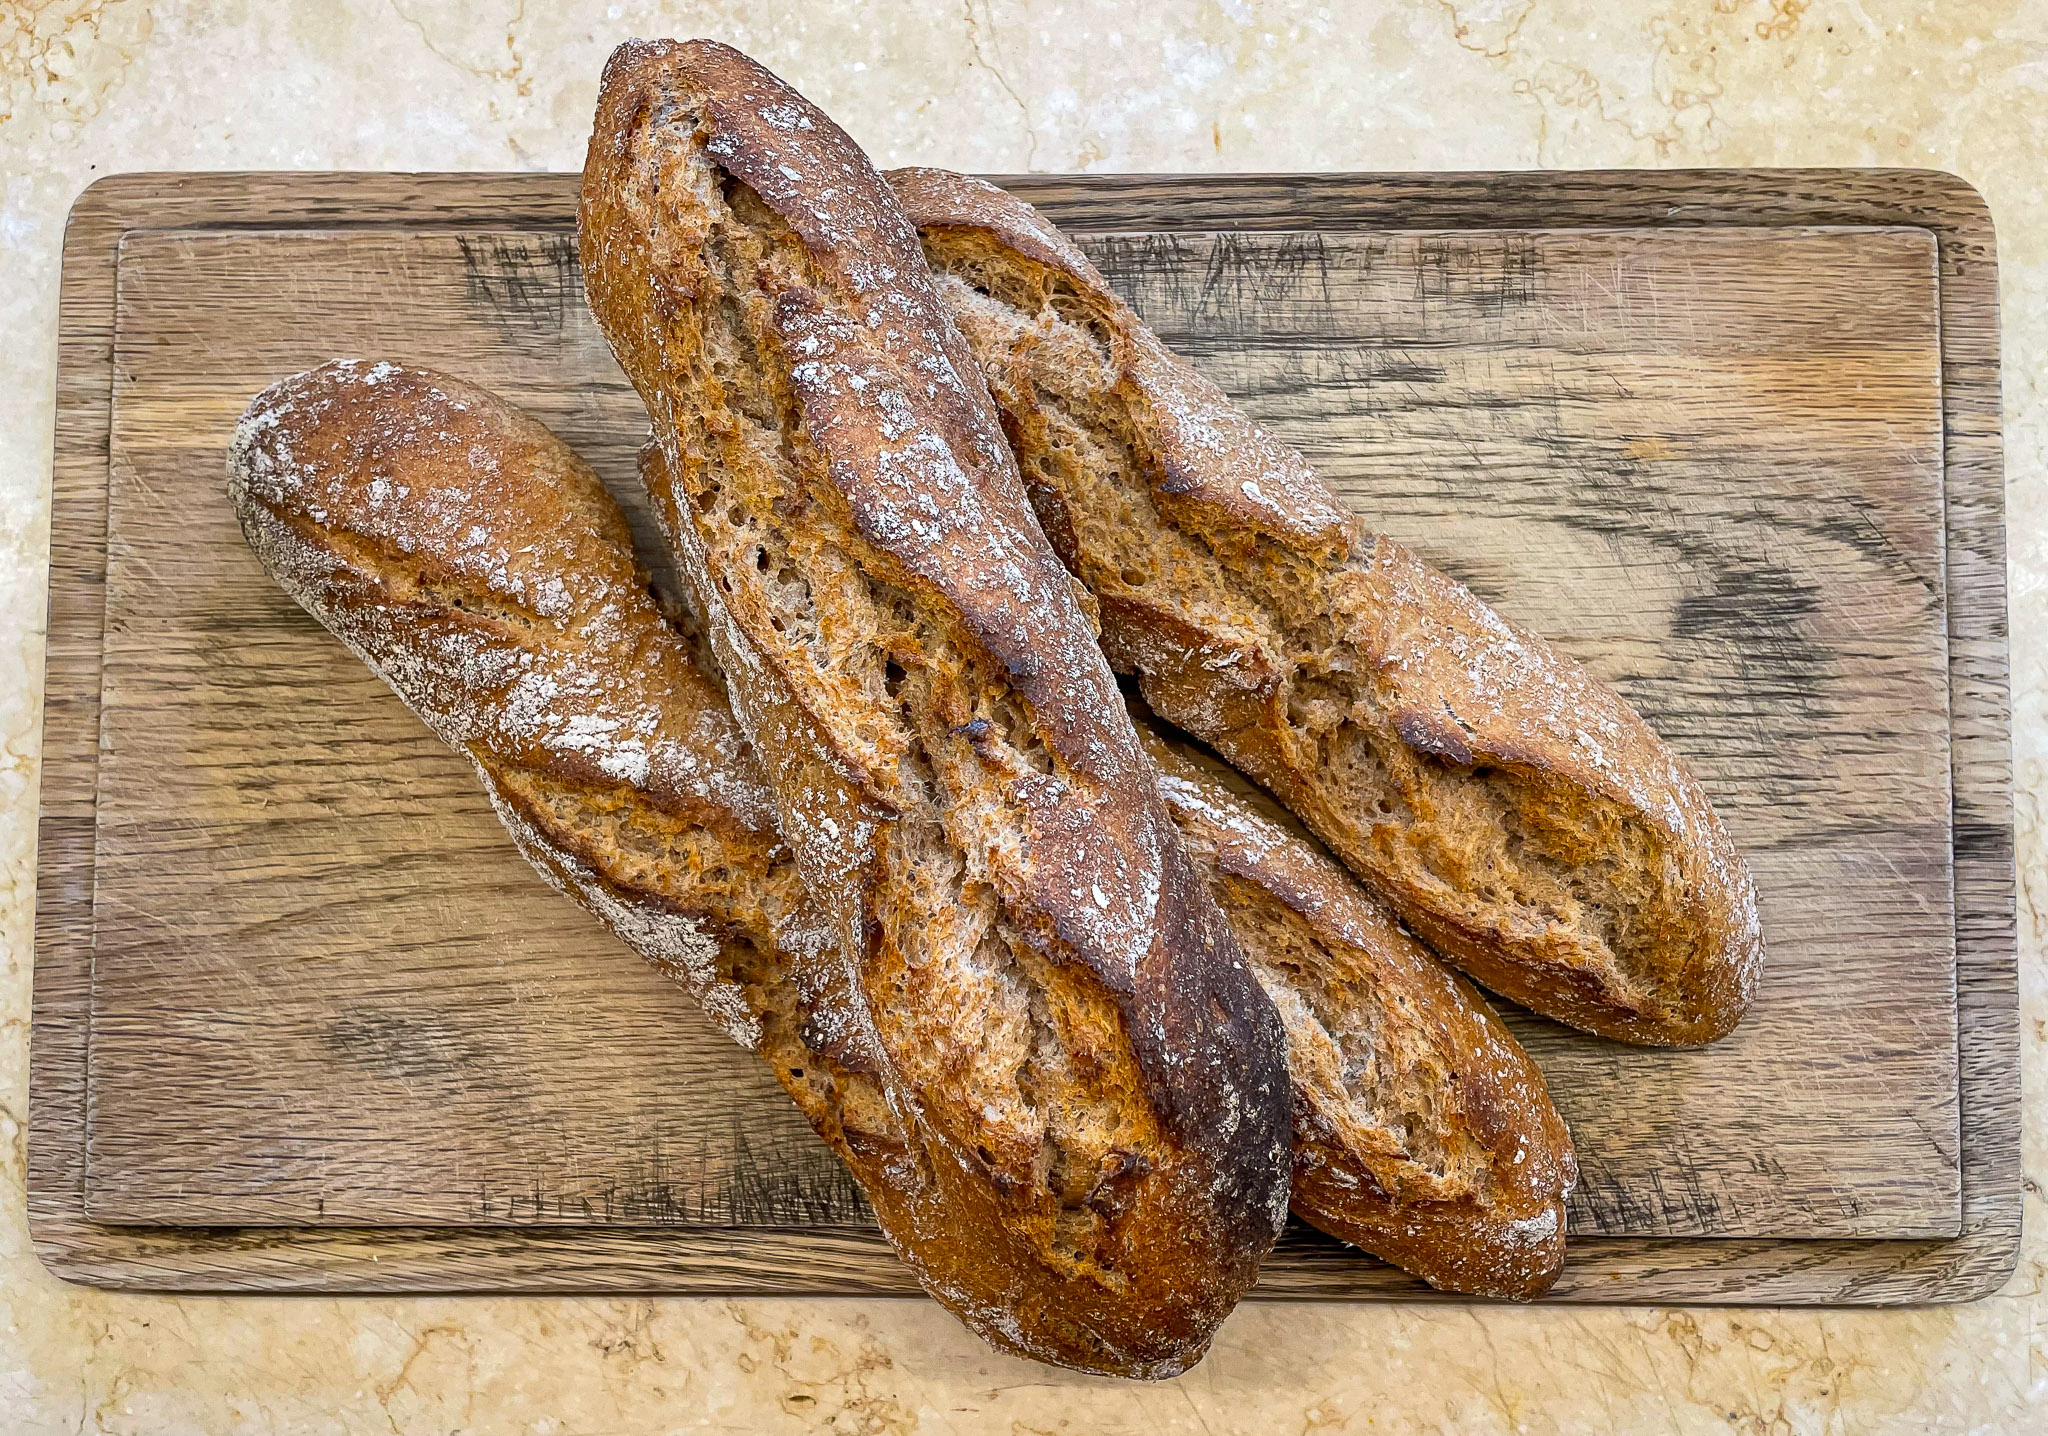 alt="four perfect looking whole spelt sourdough baguettes on a chopping board."